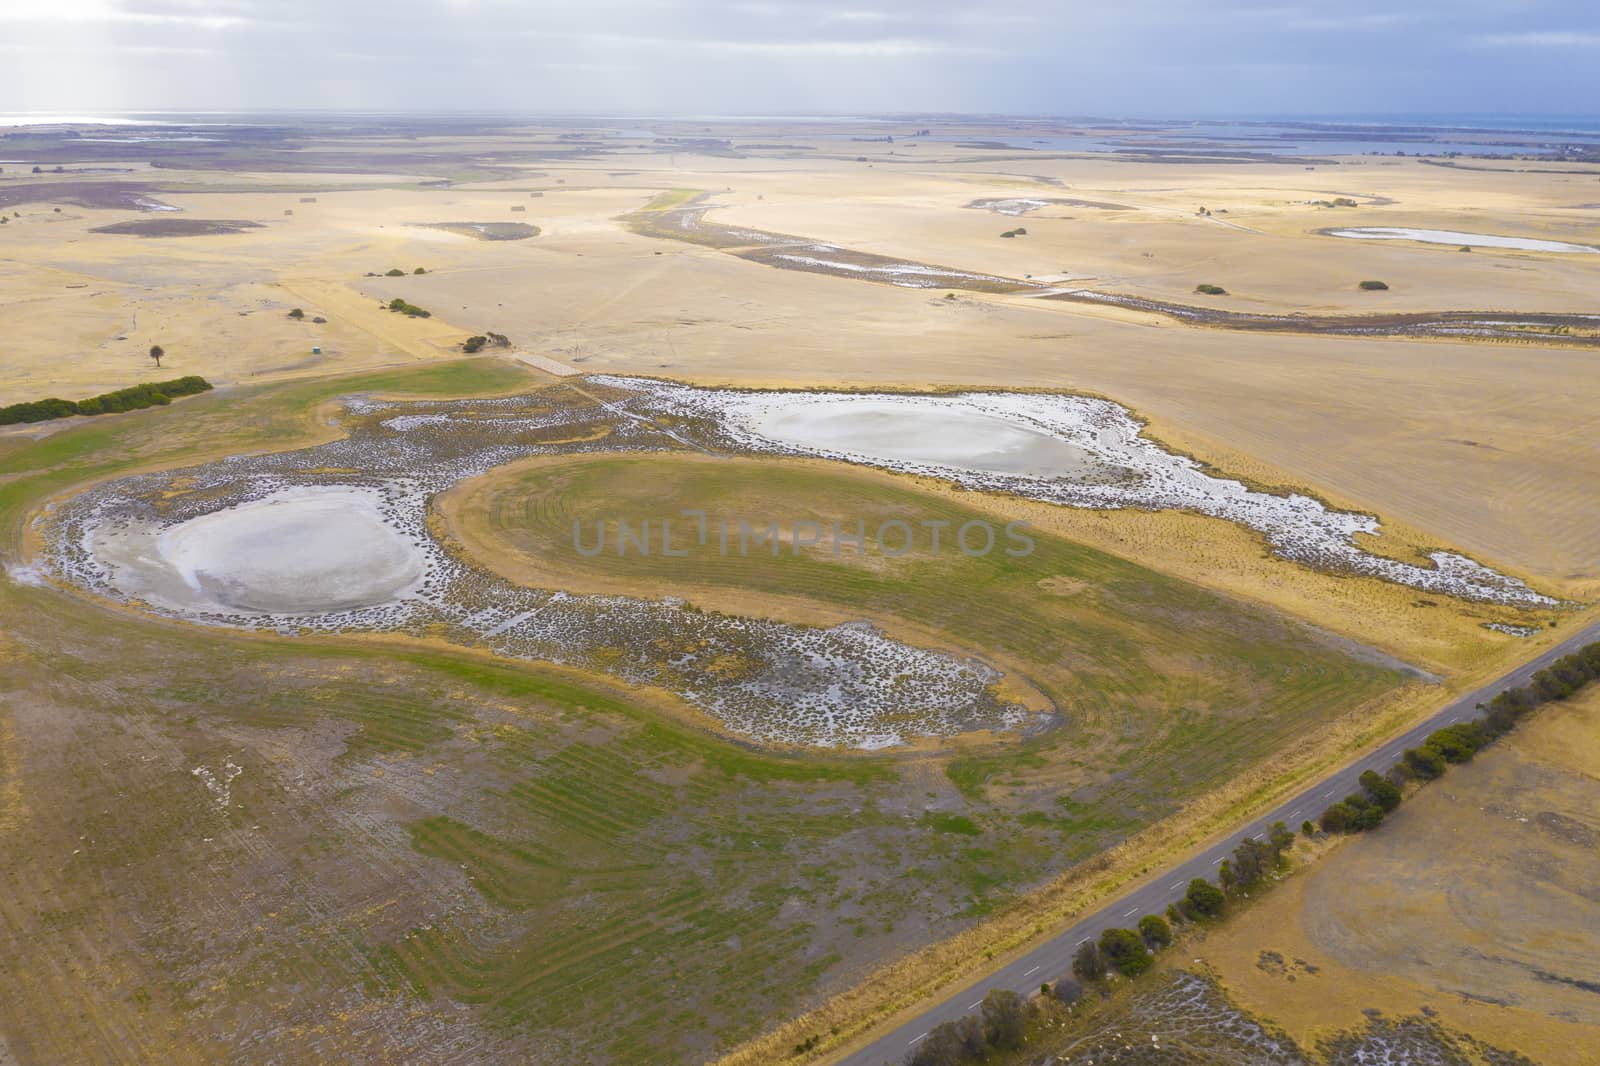 Aerial view of an agricultural irrigation dam affected by drought in regional Australia by WittkePhotos